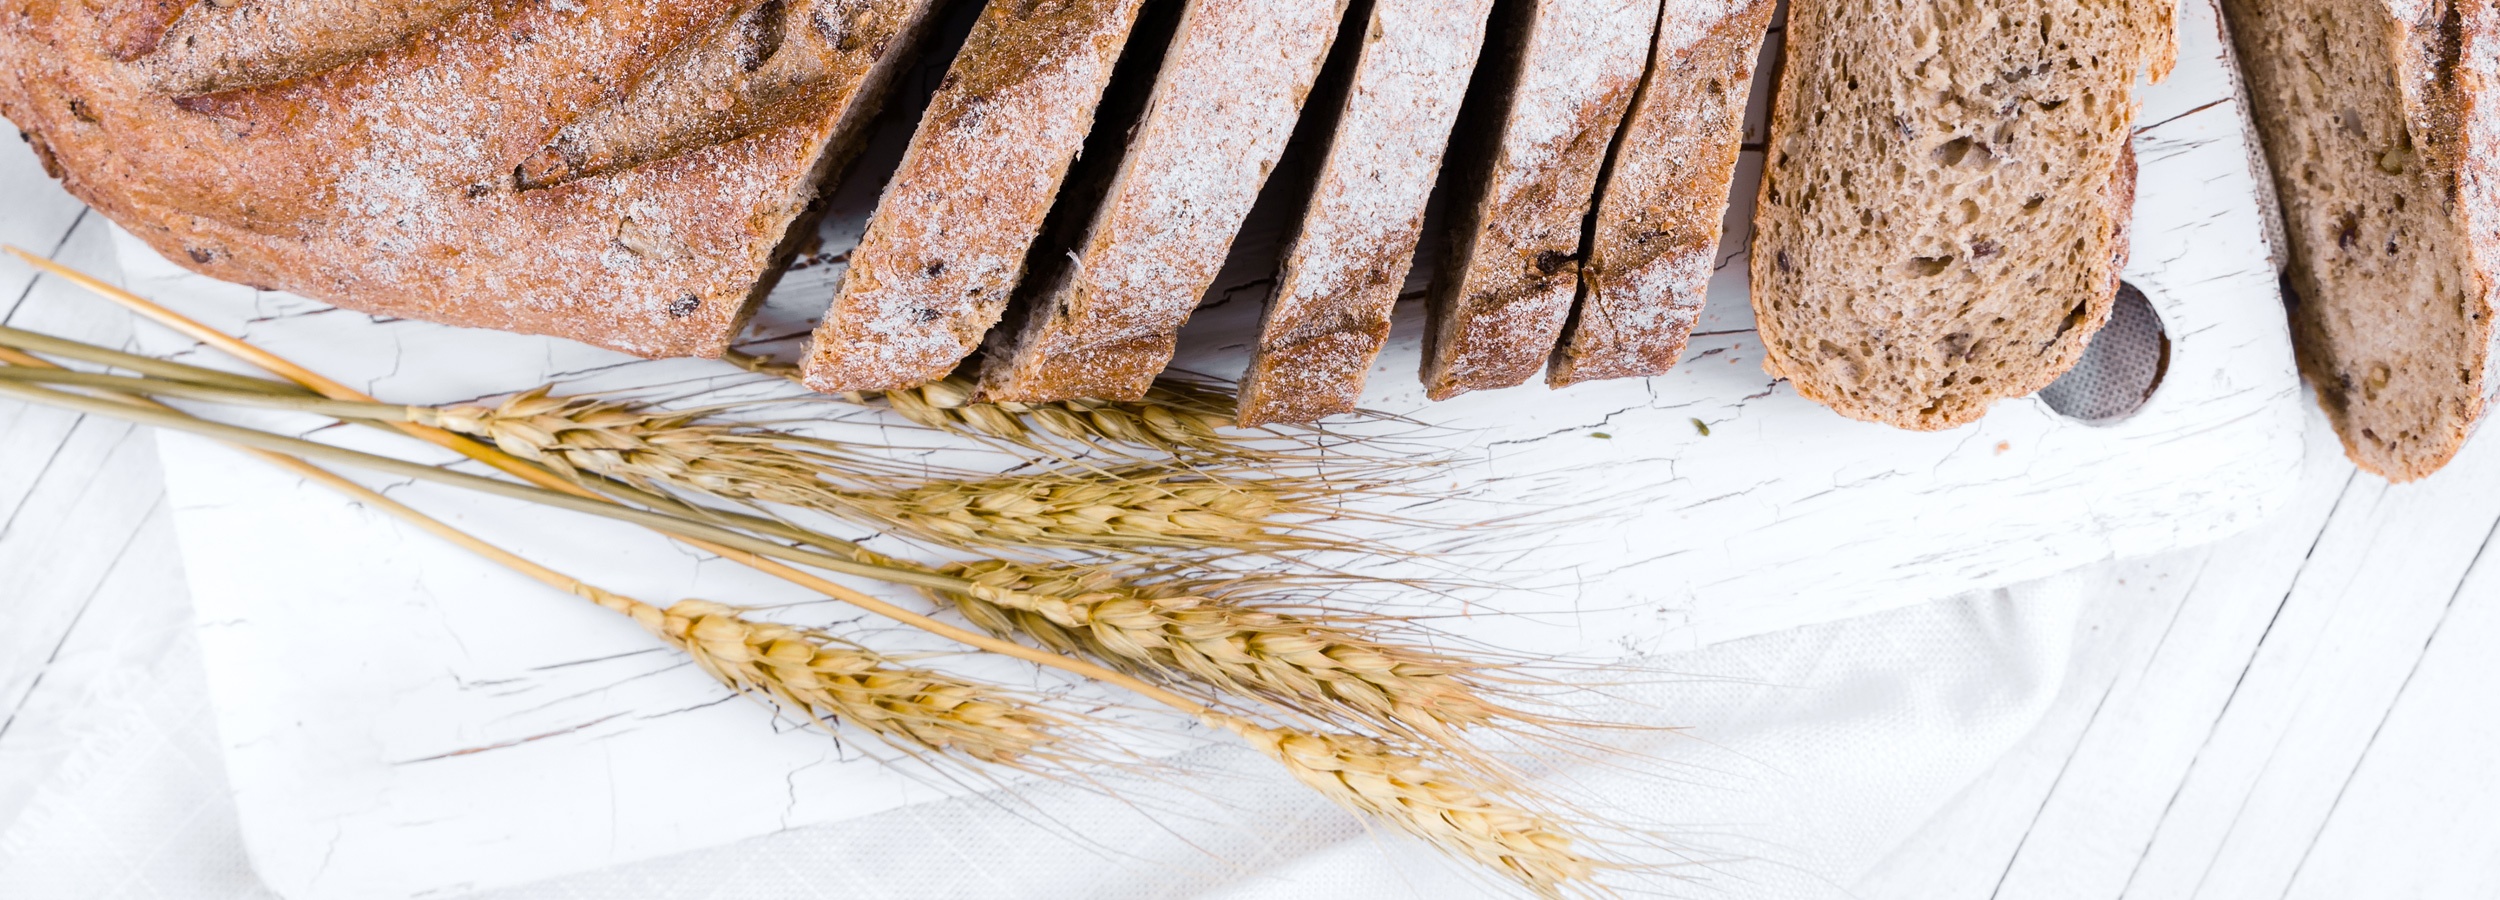 Bread contains gluten, which is a healthy protein for most people